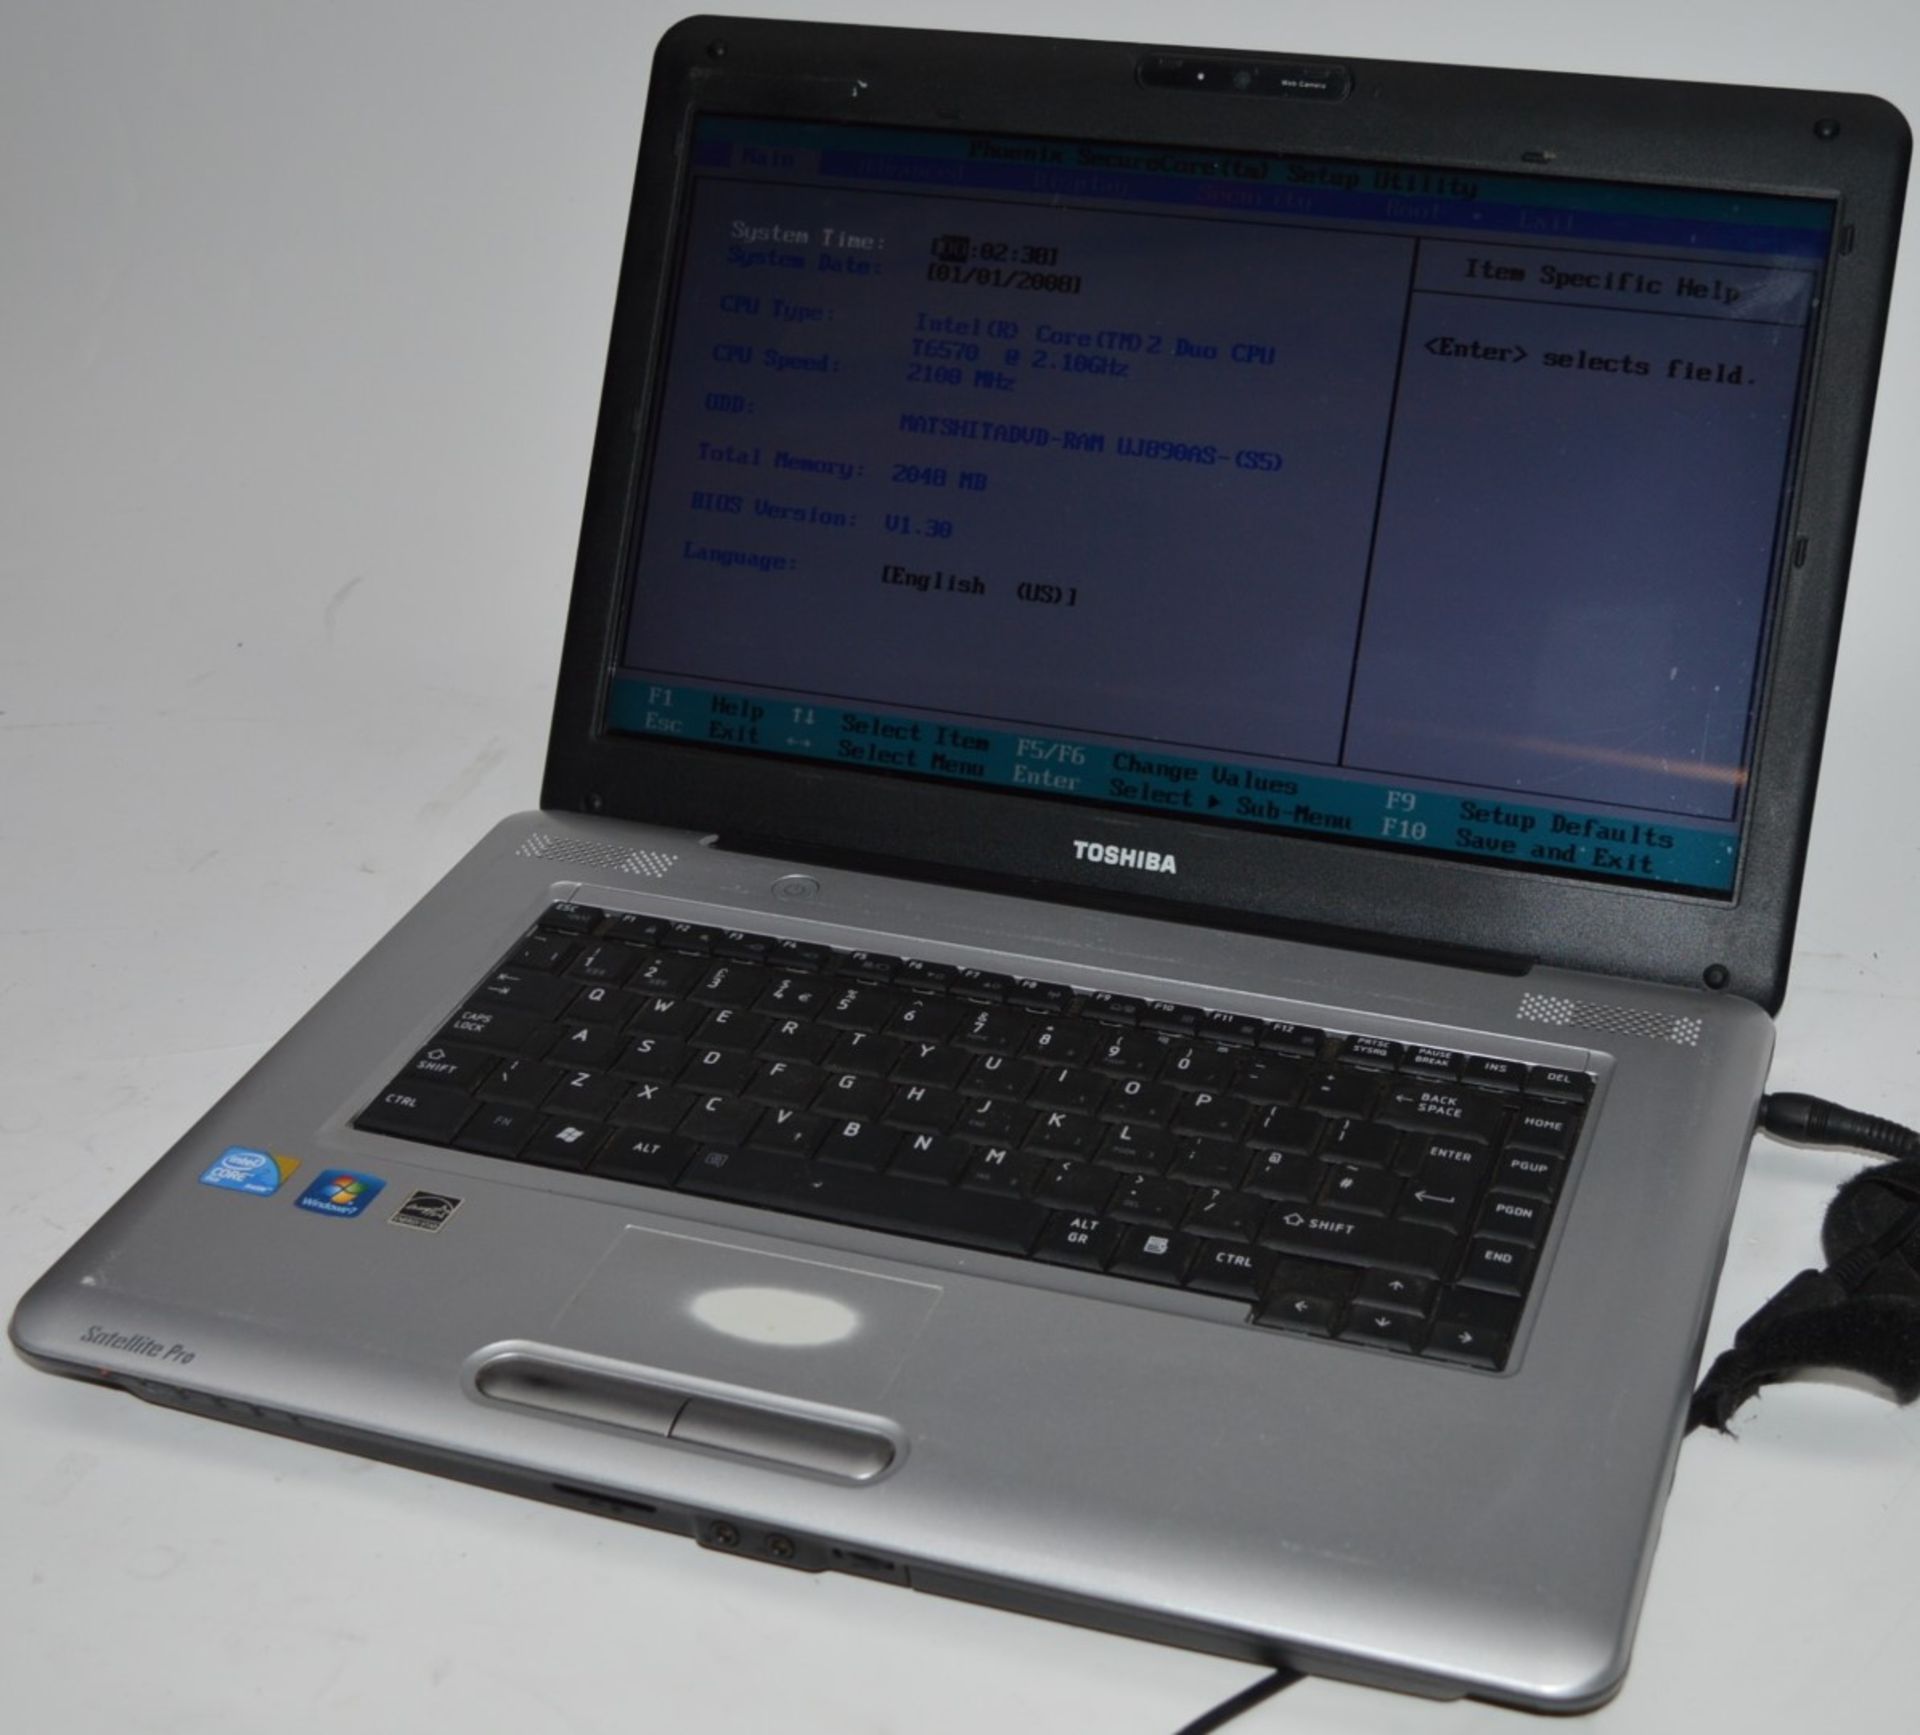 1 x Toshiba 15.4 Inch Laptop Computer - Intel Core 2 Duo T6570 Processor and 2gb Ram - Tested to